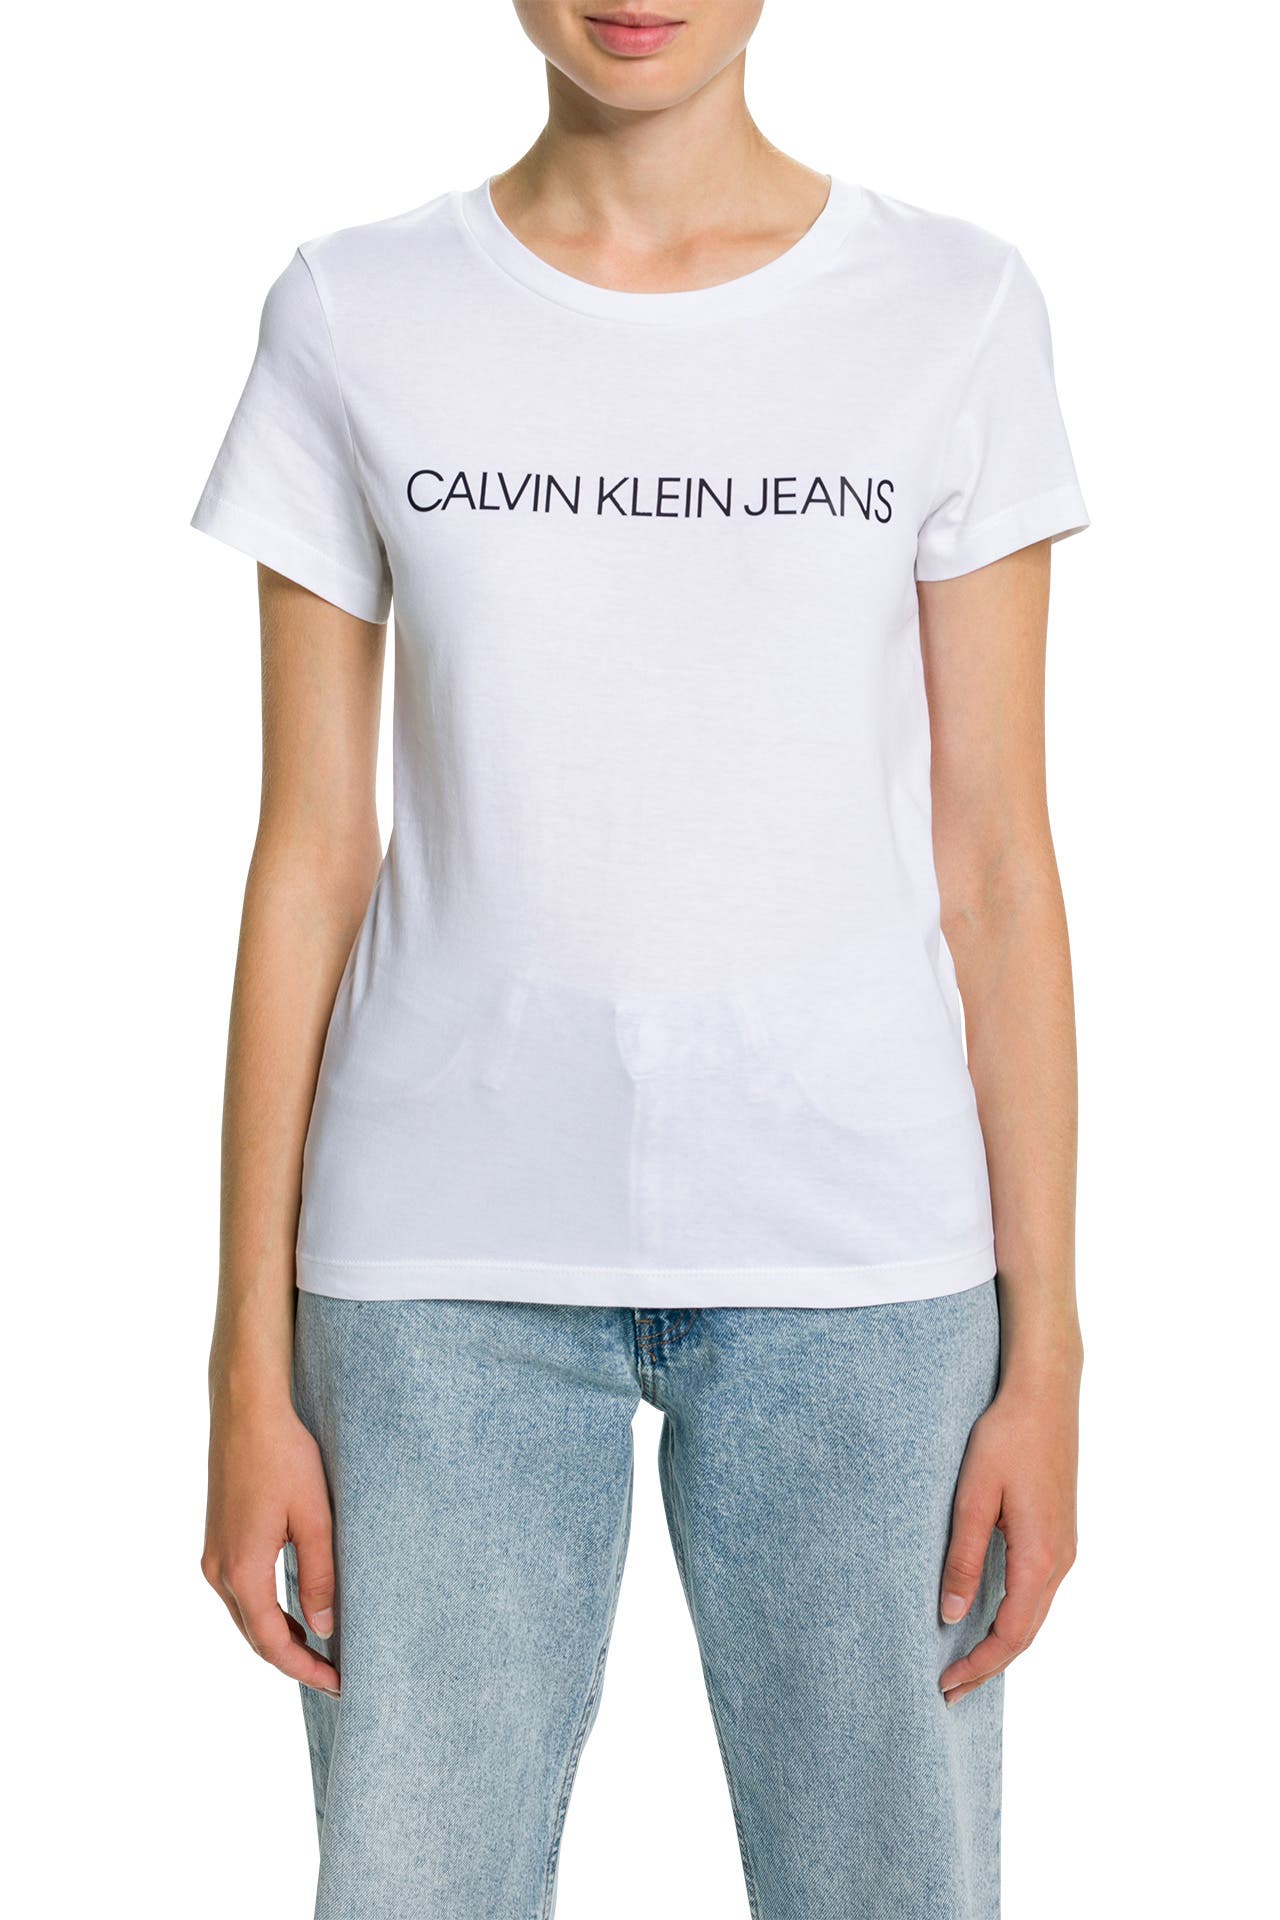 Calvin Klein OUTLET in Germany • Sale up to 70% off | OUTLETCITY METZINGEN